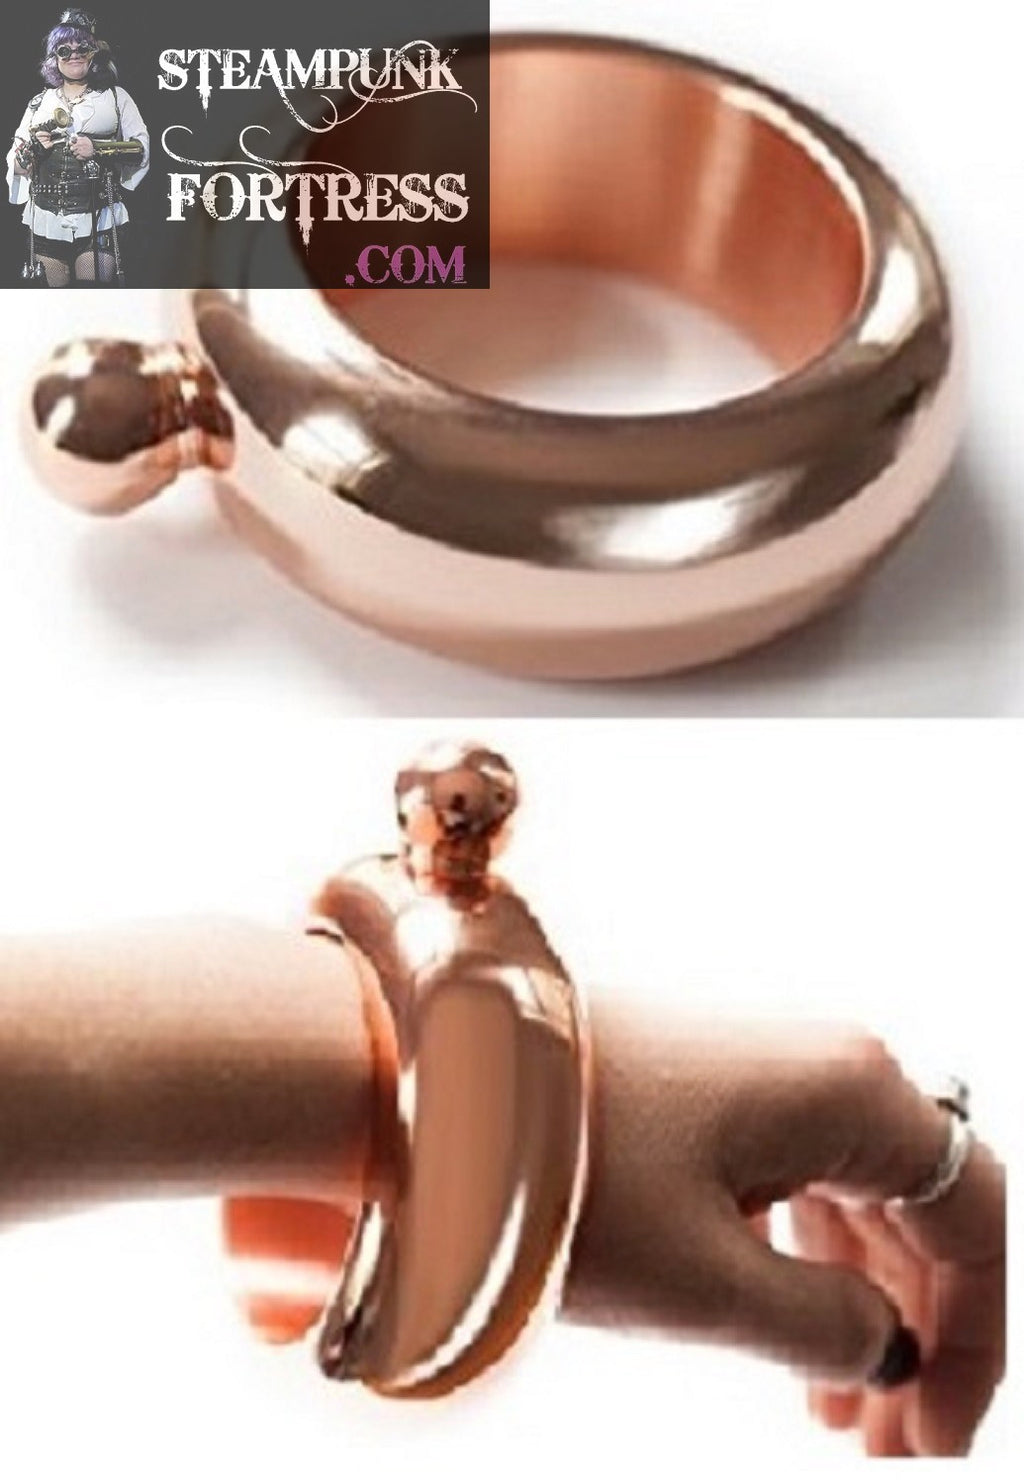 COPPER ROSE GOLD 3.5 OZ OUNCES BRACELET FLASK BANGLE WORKS HOLDS LIQUOR CONCERTS FESTIVALS PARTIES DRY COUNTIES NEW- MASS PRODUCED